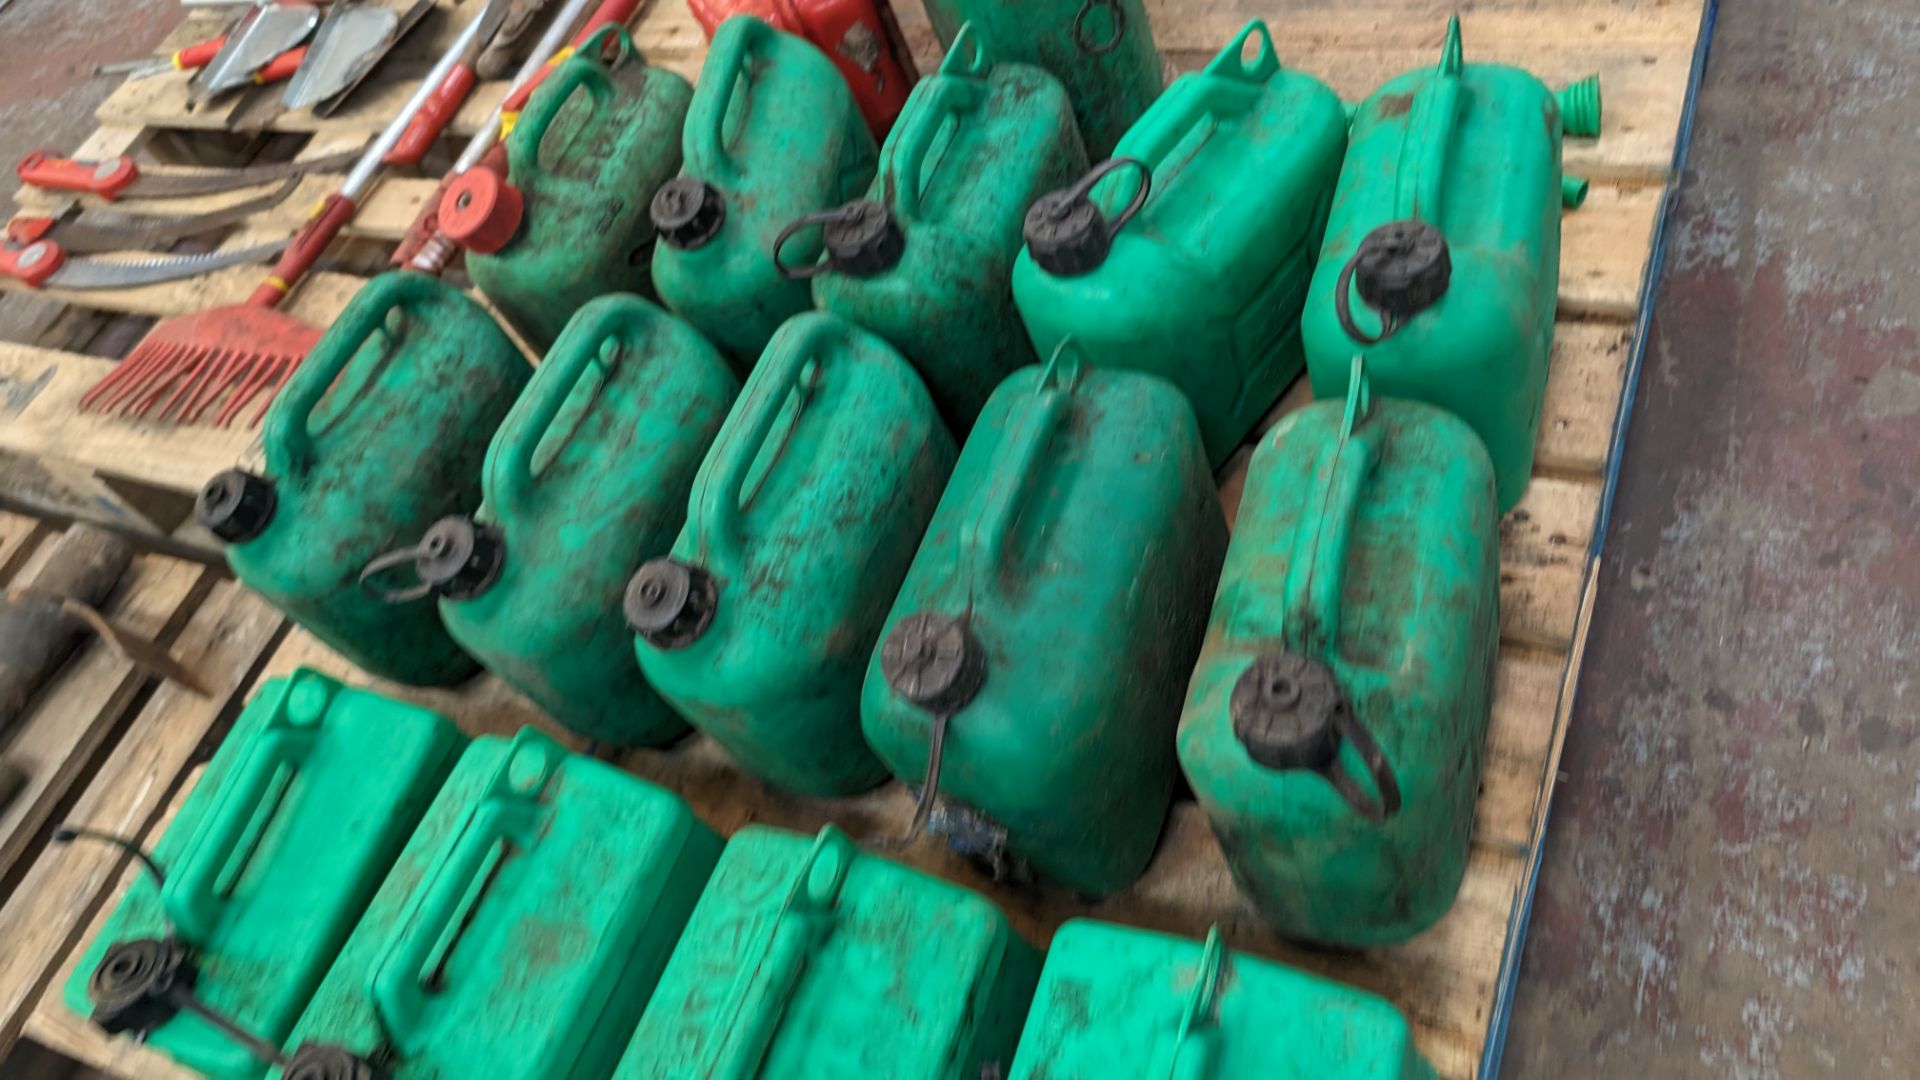 The contents of a pallet of plastic fuel cans - Image 5 of 7